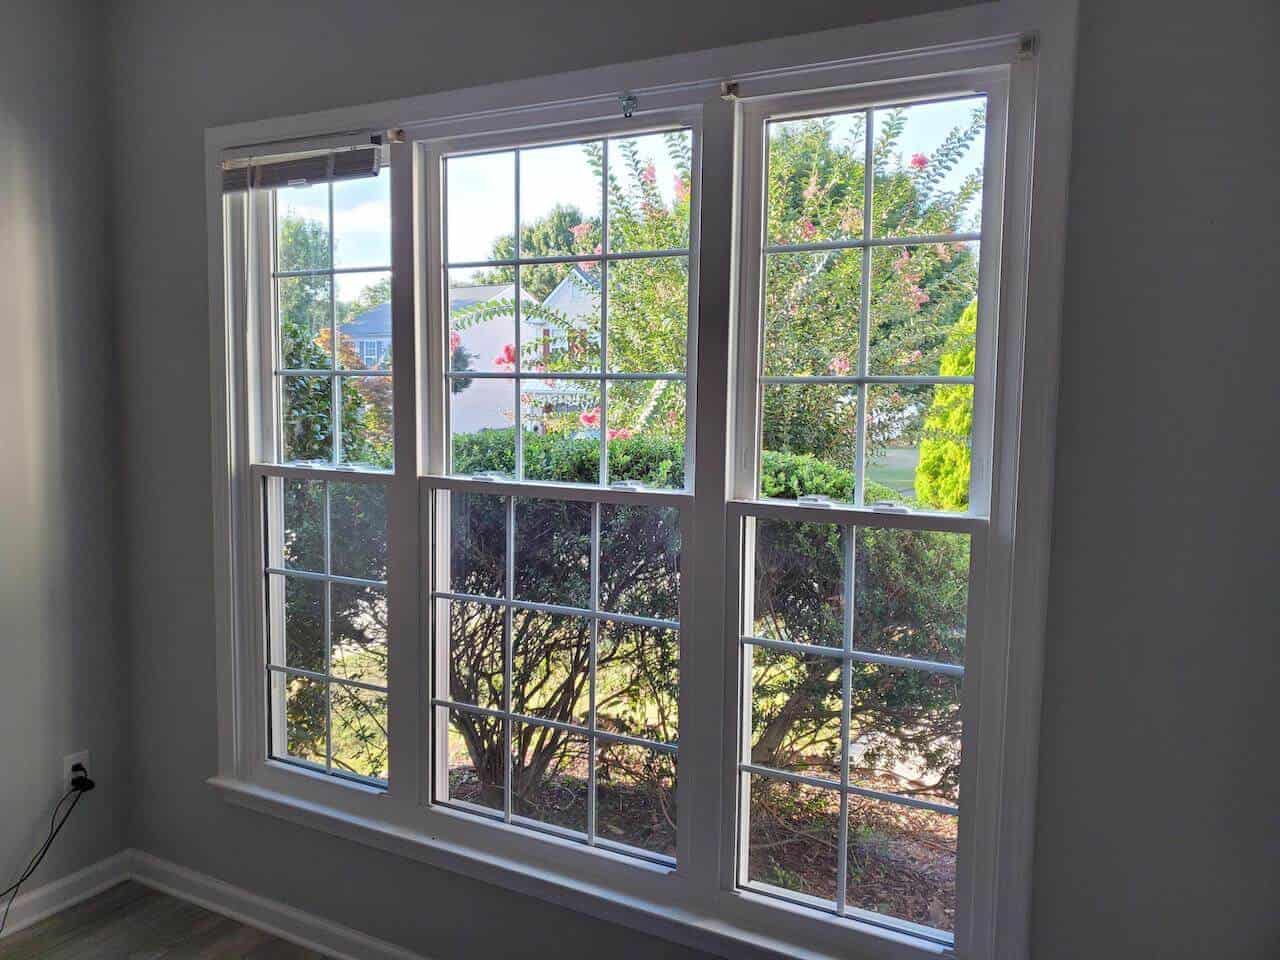 interior of a home with SoftLite single hung windows